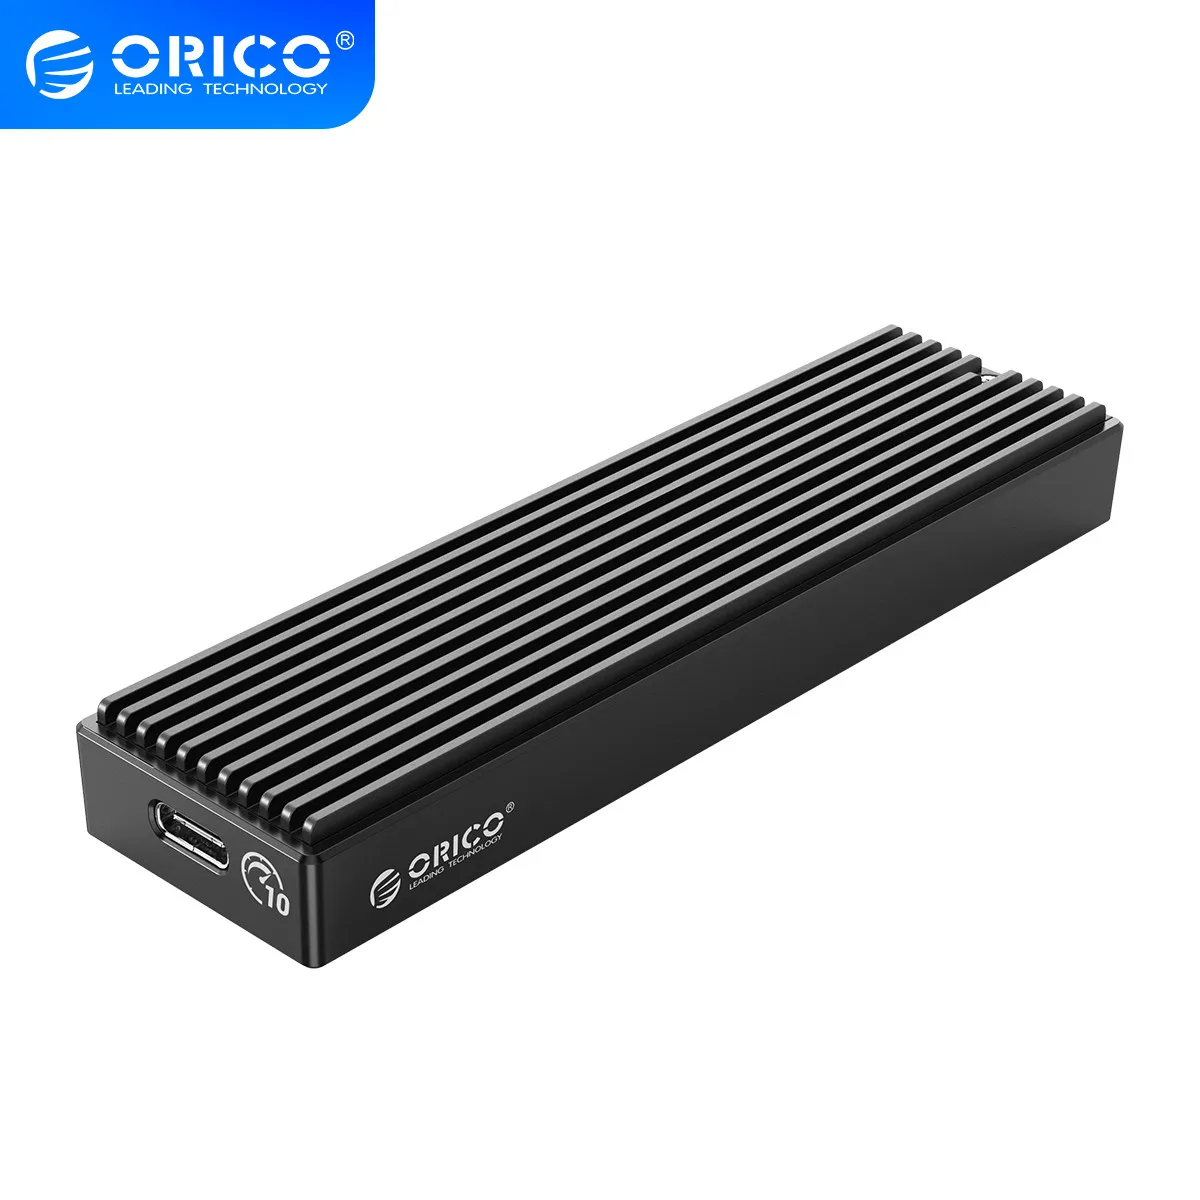 

ORICO LSDT M.2 NVME Enclosure USB C Gen2 10Gbps PCIe SSD Case M2 SATA NGFF 5Gbps SSD Case Tool Free For 2230/2242/2260/2280 SSD